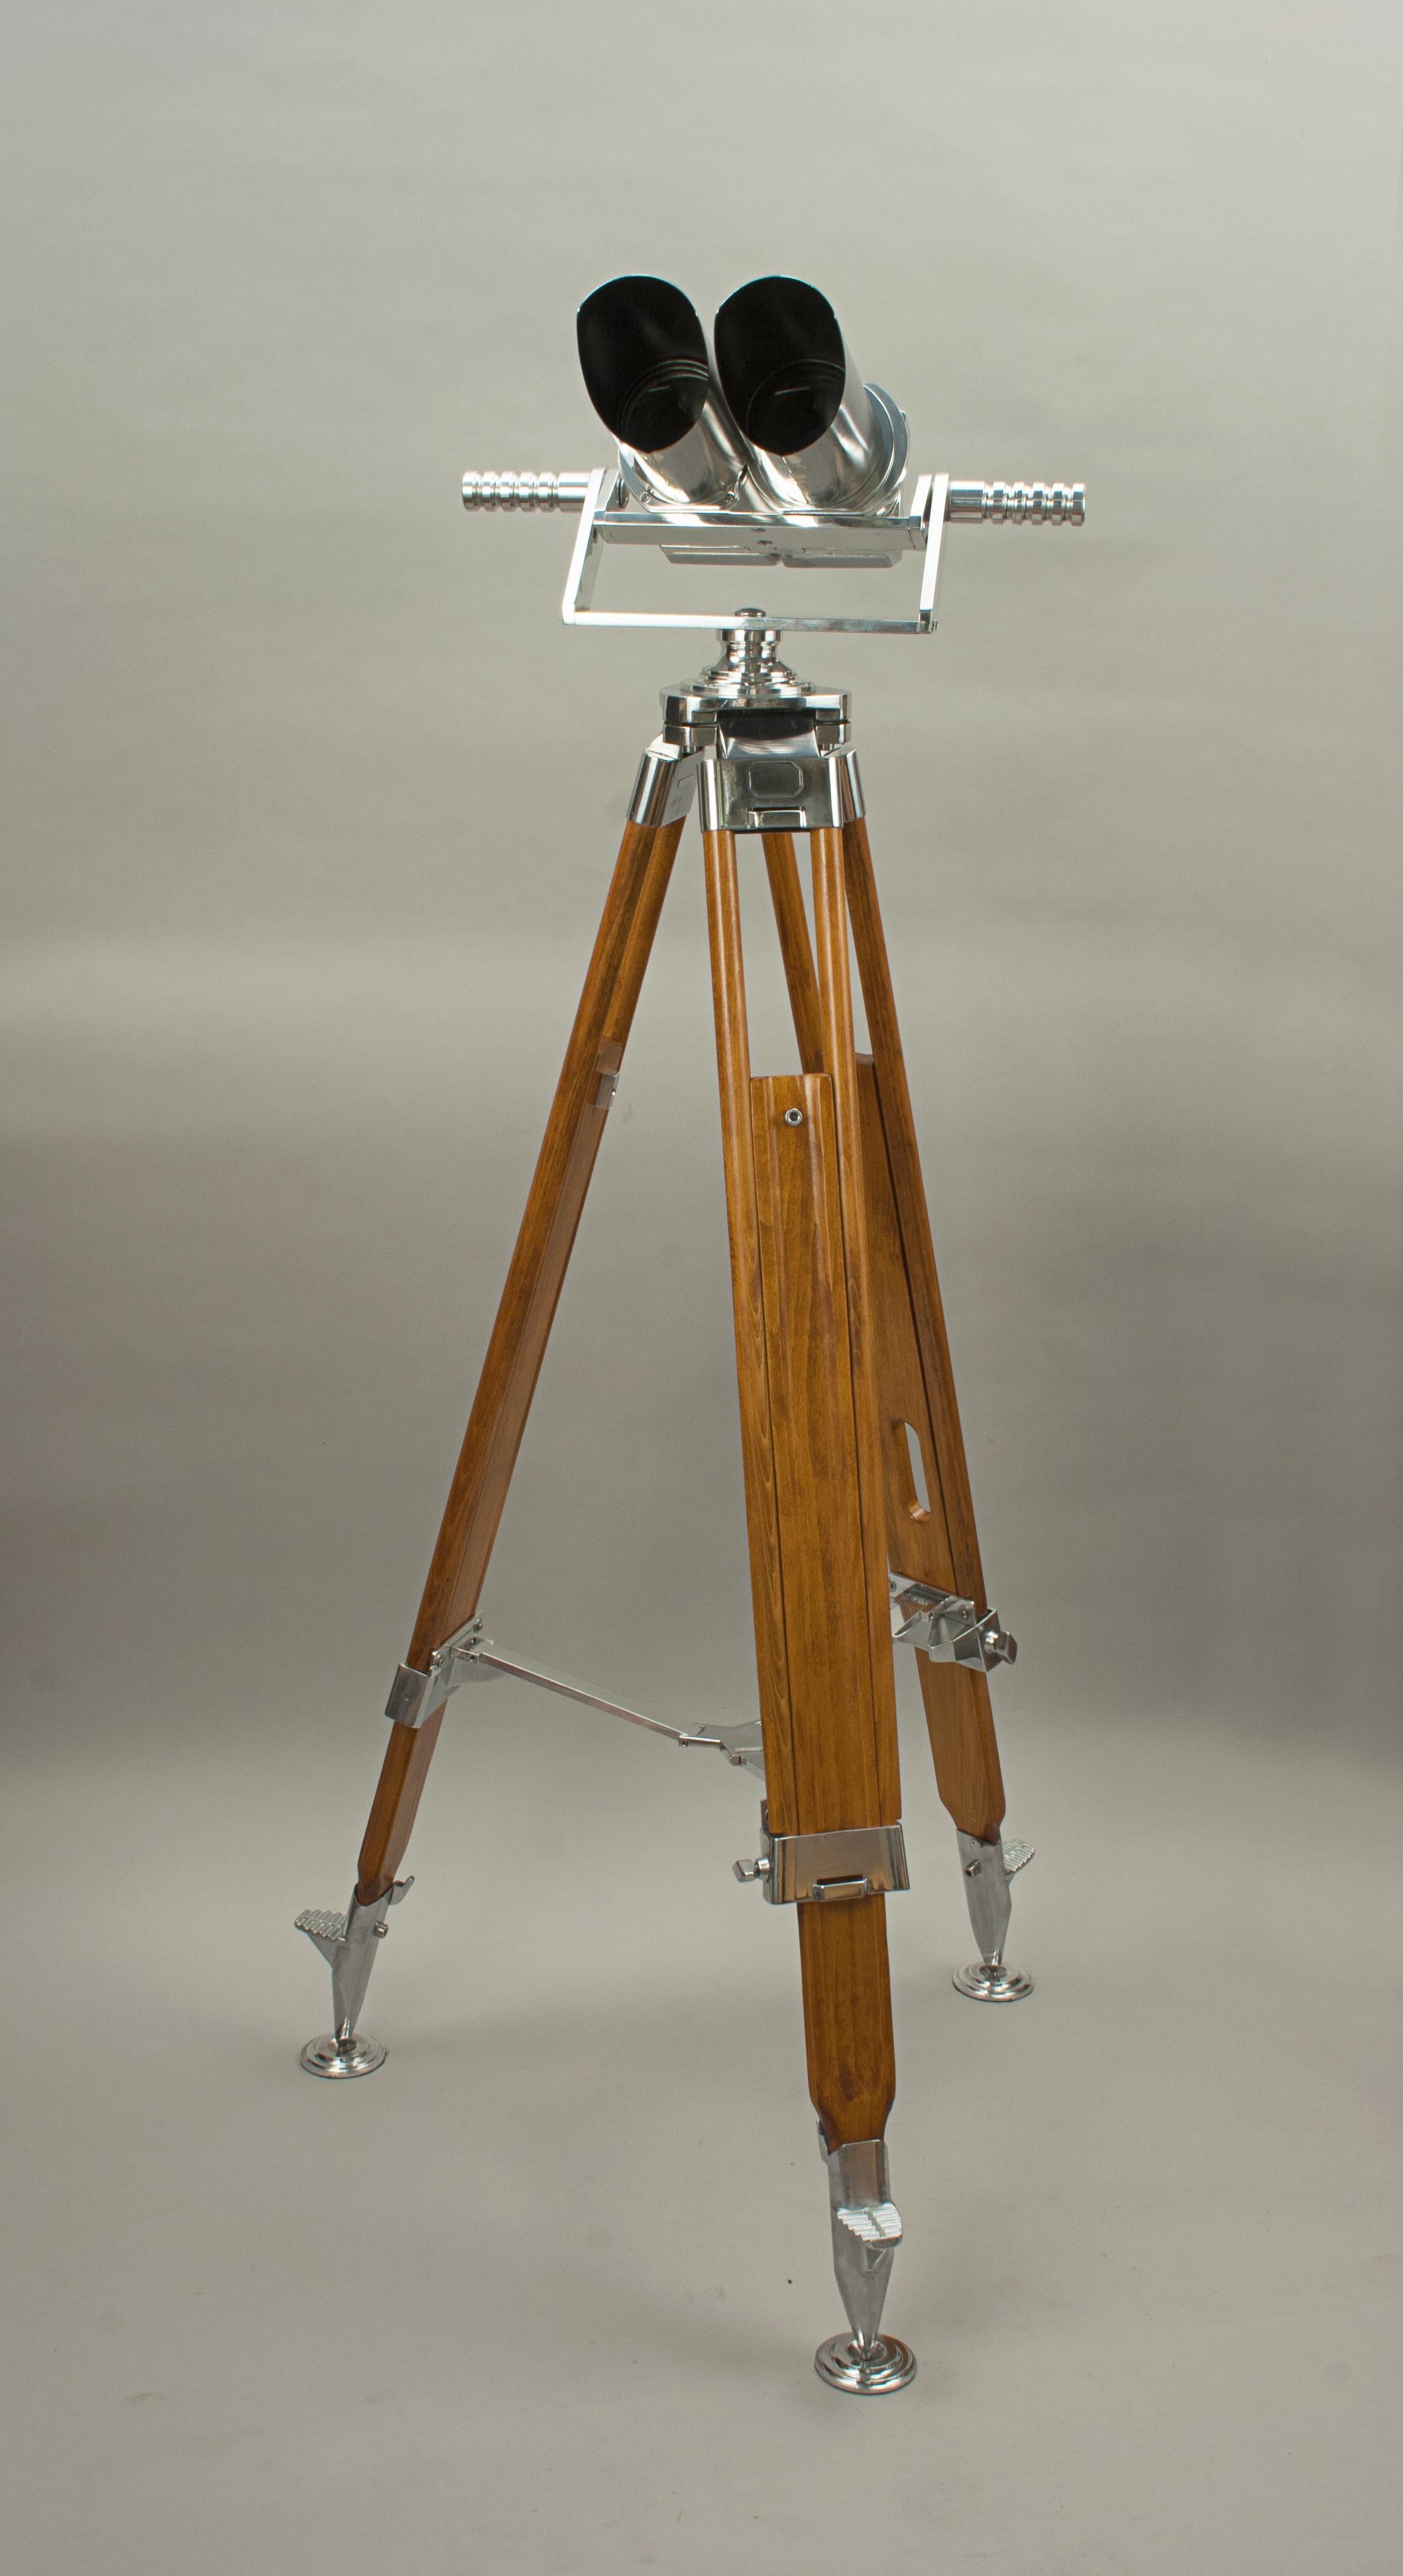 German Second World War Hensoldt Wetzlar Observation Binoculars, 10 x 80.
A pair of German ex-military observation binoculars mounted on a modern aluminium cradle and gimble with vintage adjustable wooden tripod. The binoculars with 45º incline